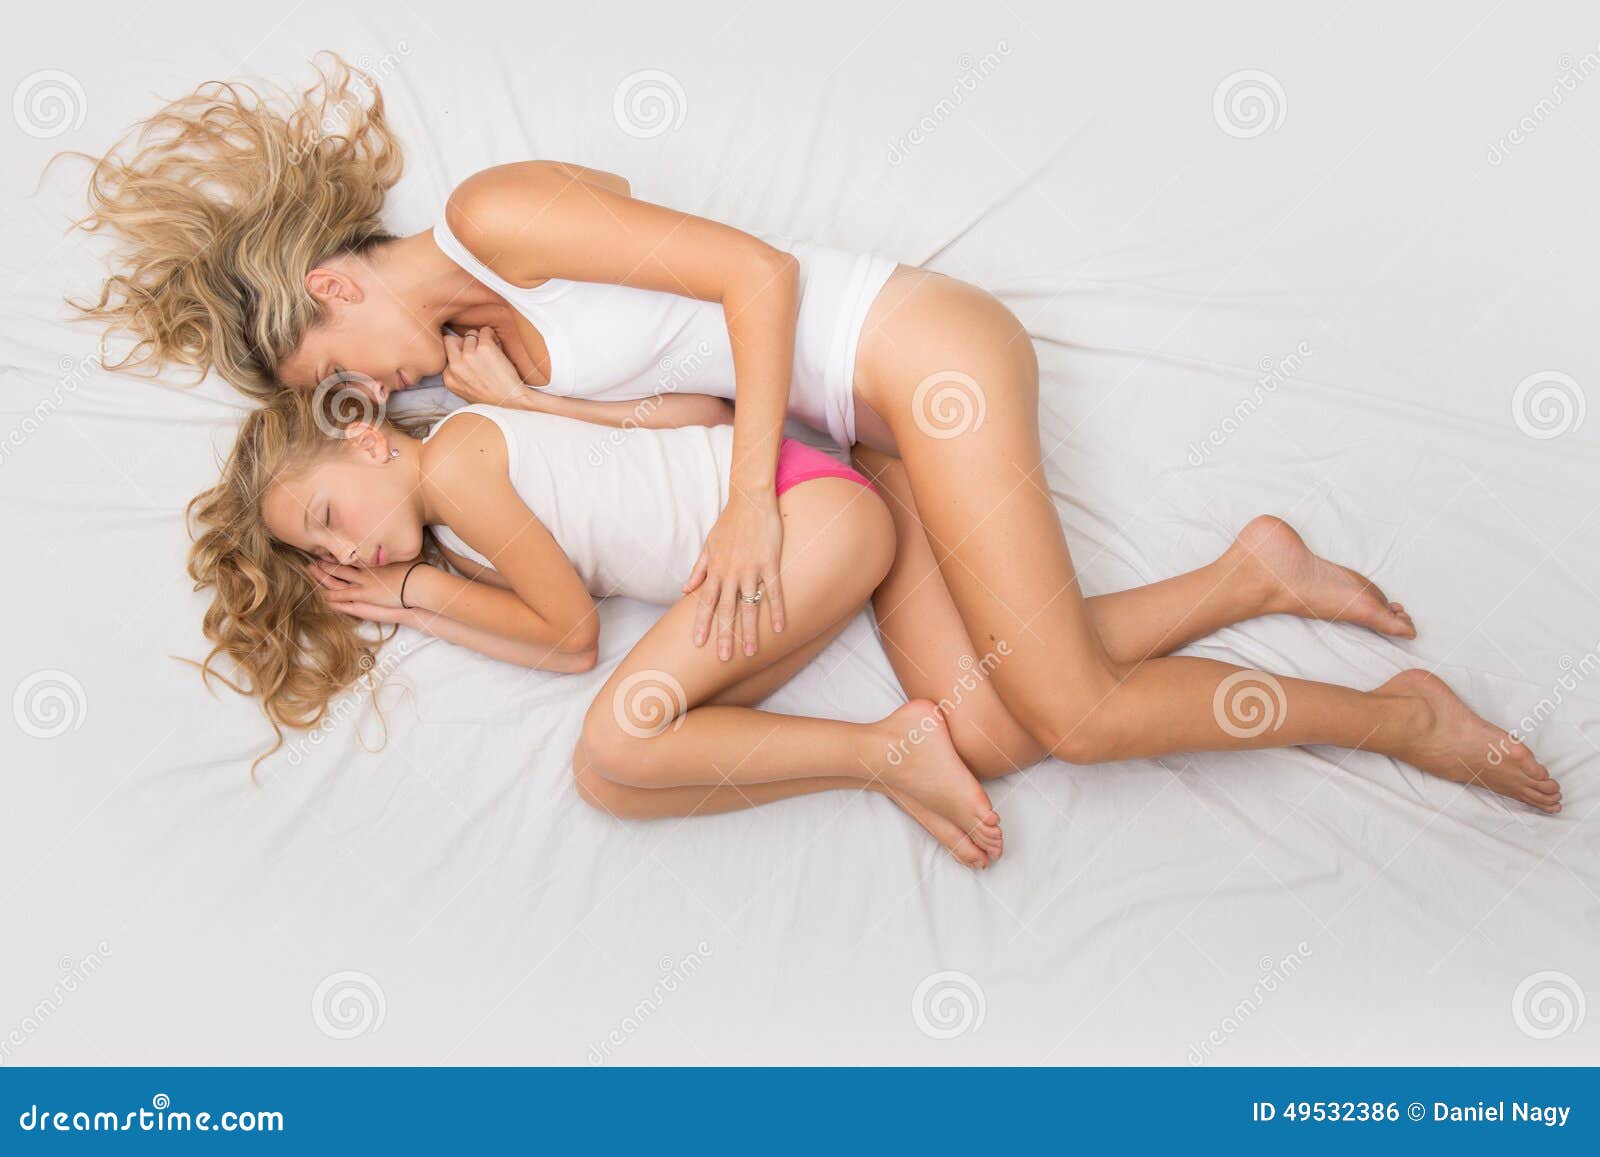 Beautiful Curly Blonde Woman and Child Sleep Together Stock Photo